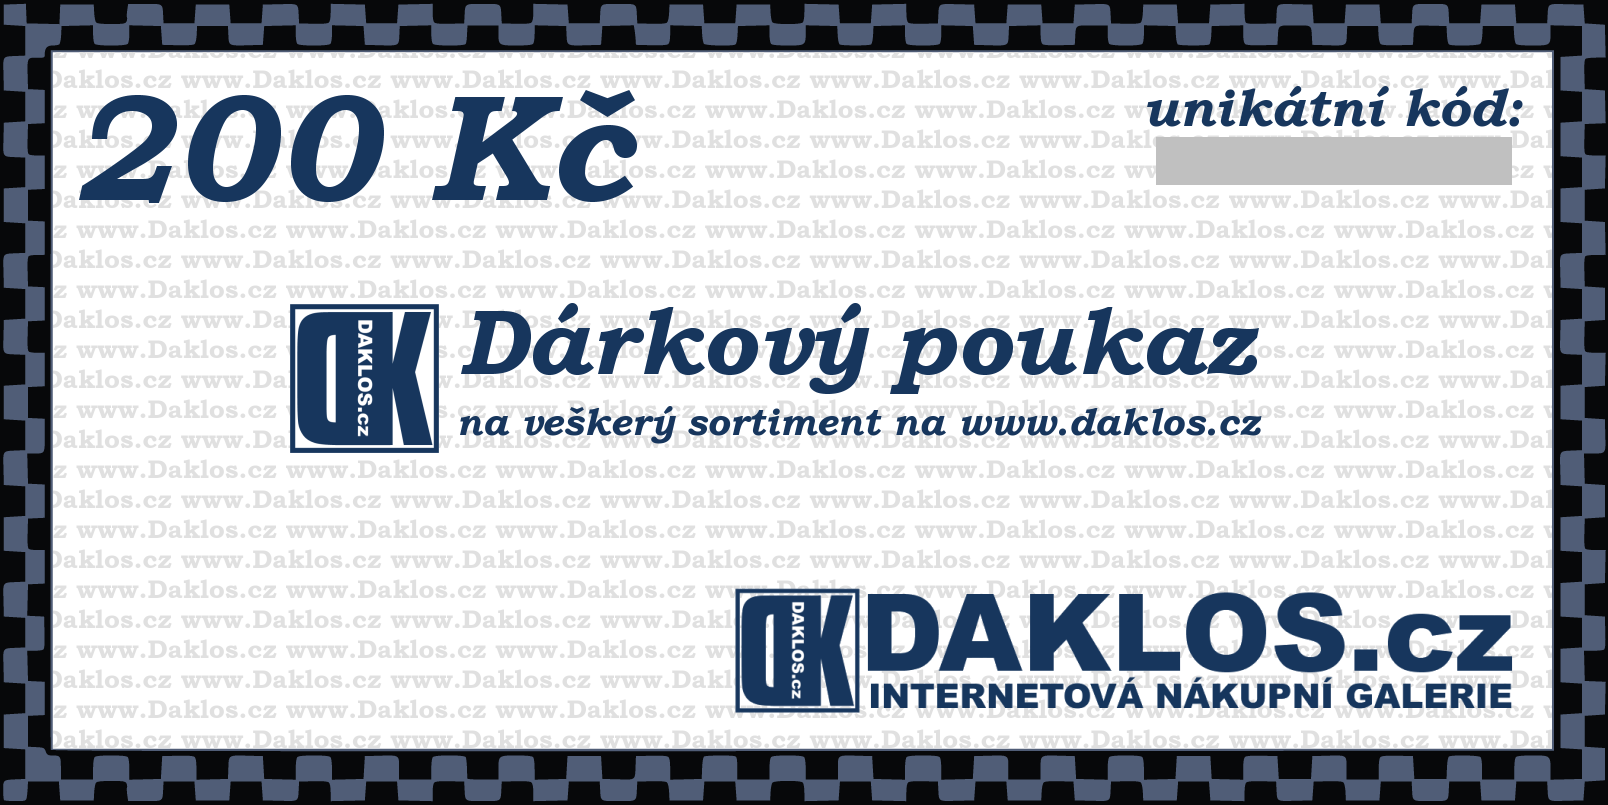 http://www.daklos.cz/index.php?id_product=1458&controller=product